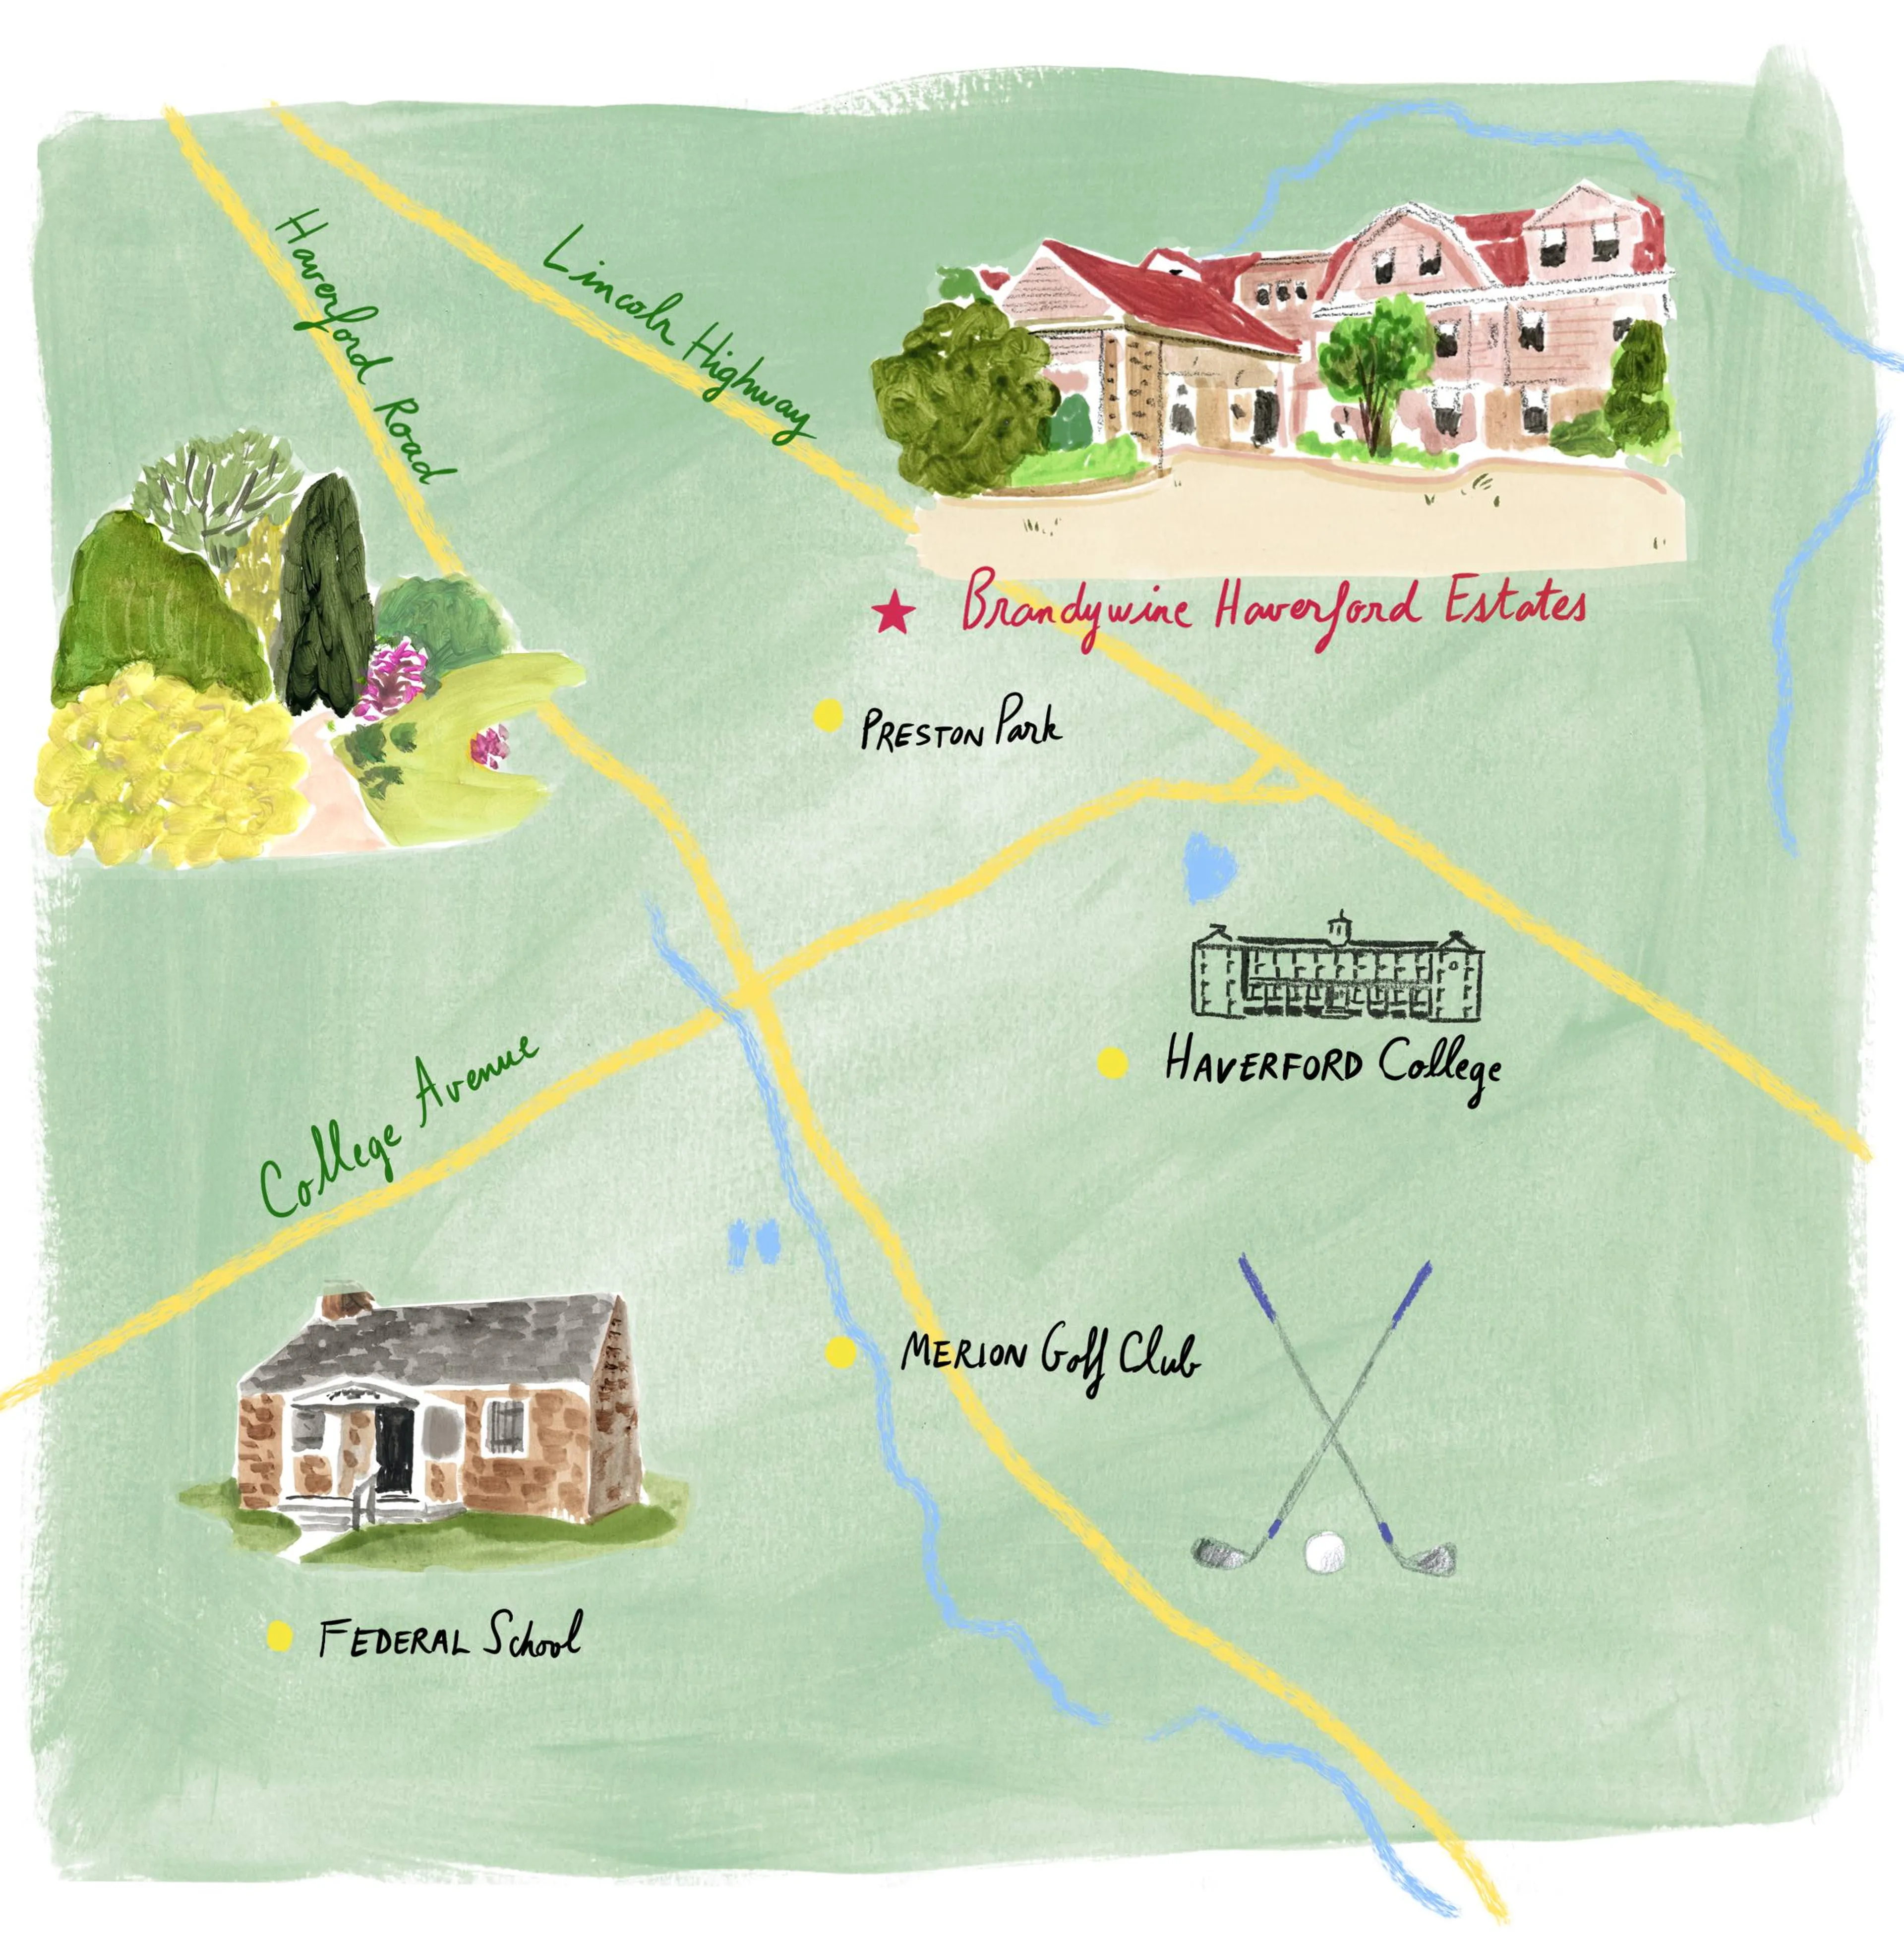 Hand-illustrated map of major roads and landmarks surrounding Brandywine Haverford Estates in Haverford, PA